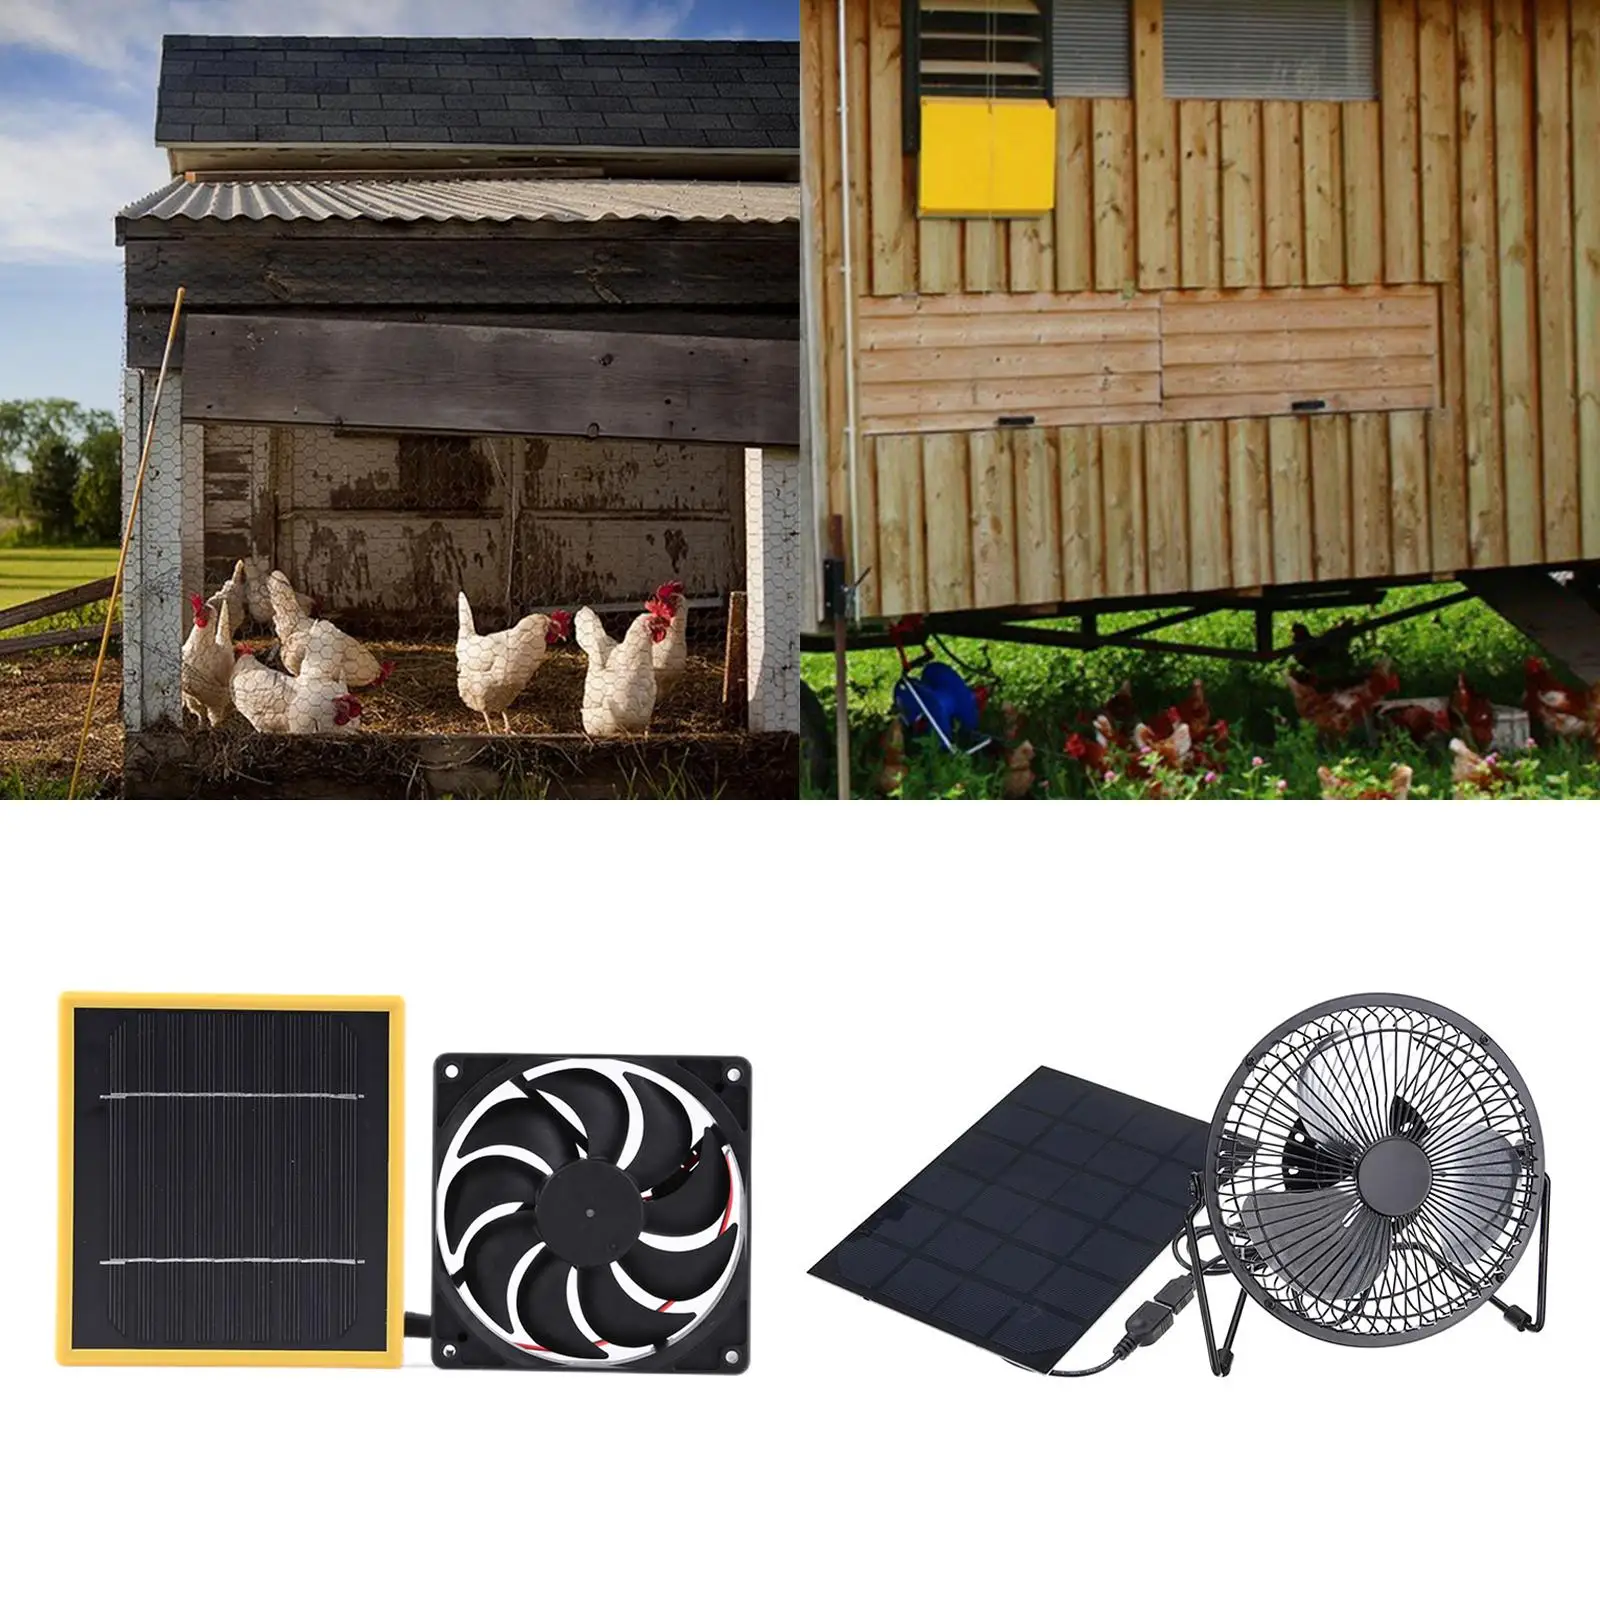 Portable Solar Exhaust Fan Greenhouse Fan Powered Fan for Greenhouse, Dog Chicken House Camping, RV, Car,